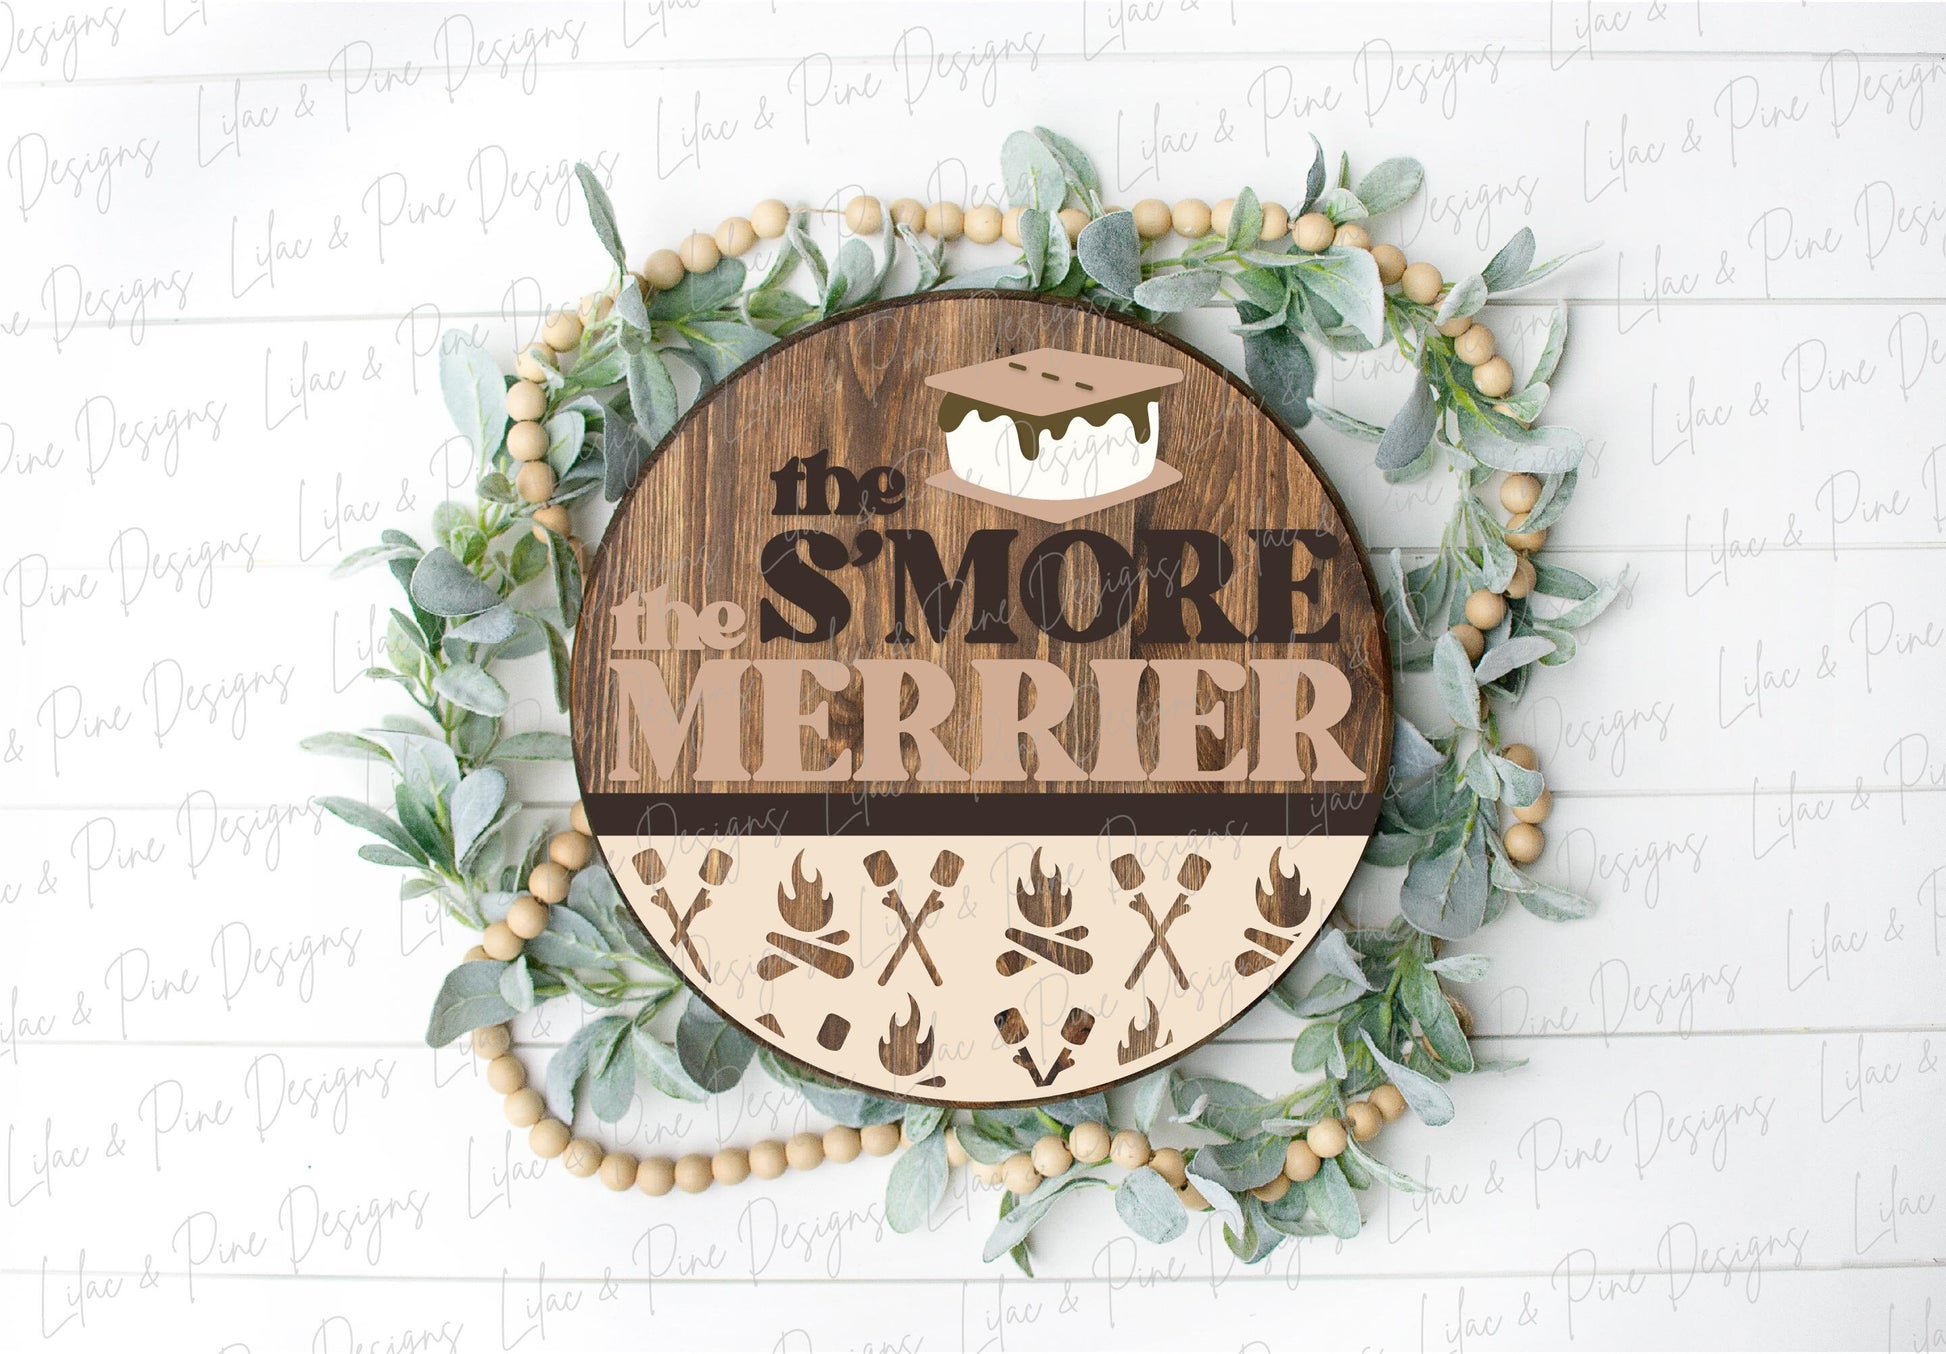 Smore the Merrier sign, Camping sign SVG, Campfire welcome sign, S'more door hanger, Funny round wood sign, Glowforge Svg, laser cut file